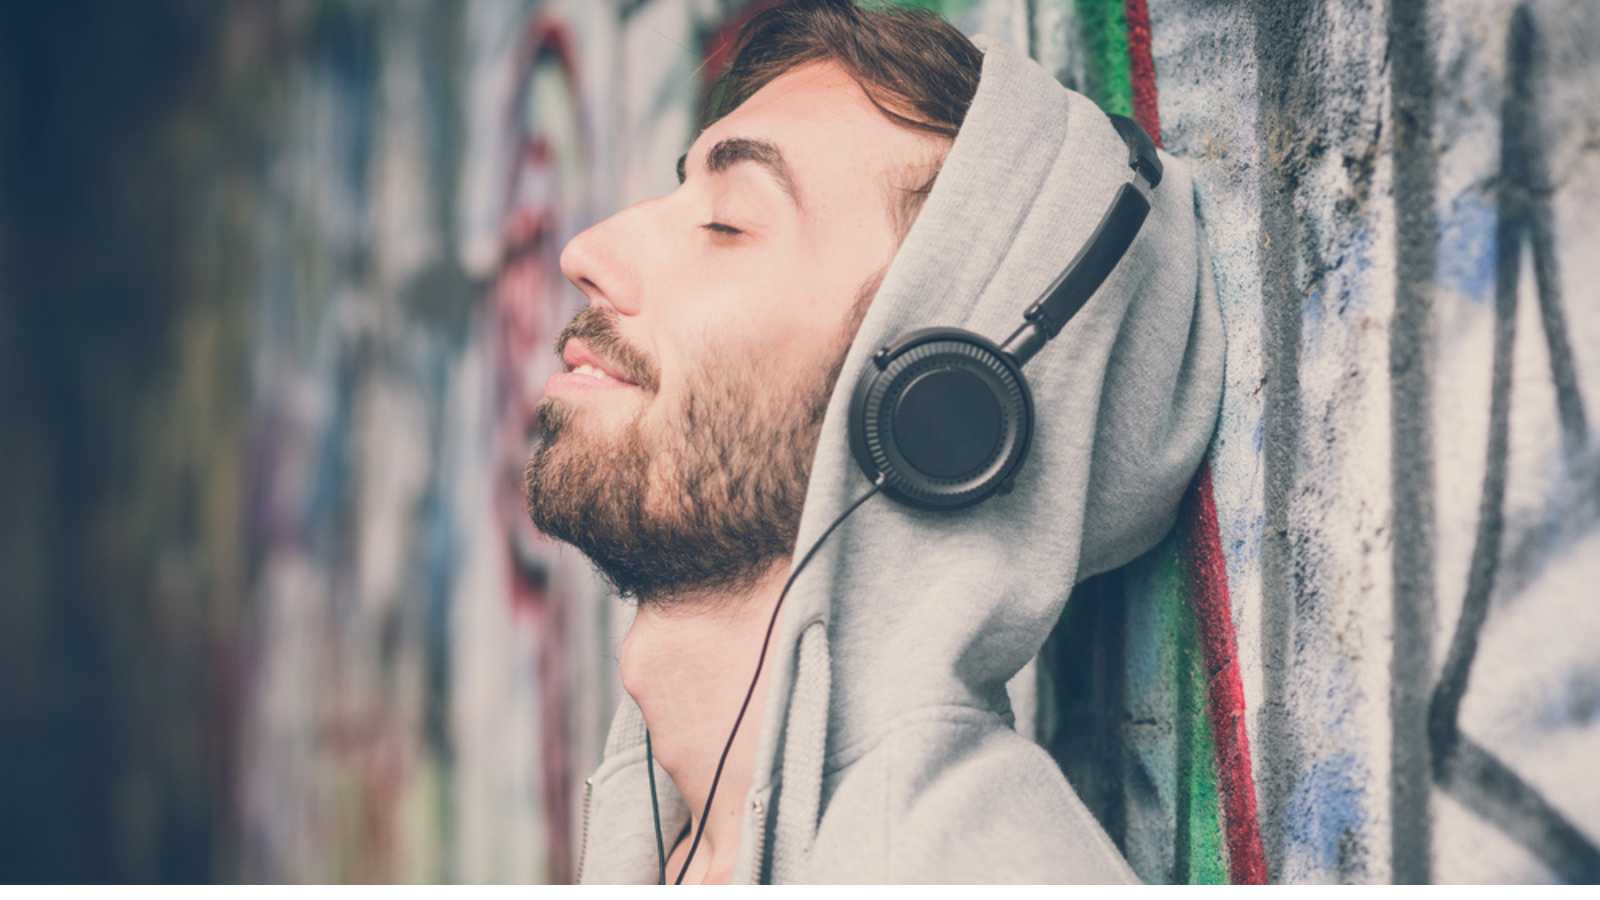 Man Listening To Music In Mobile